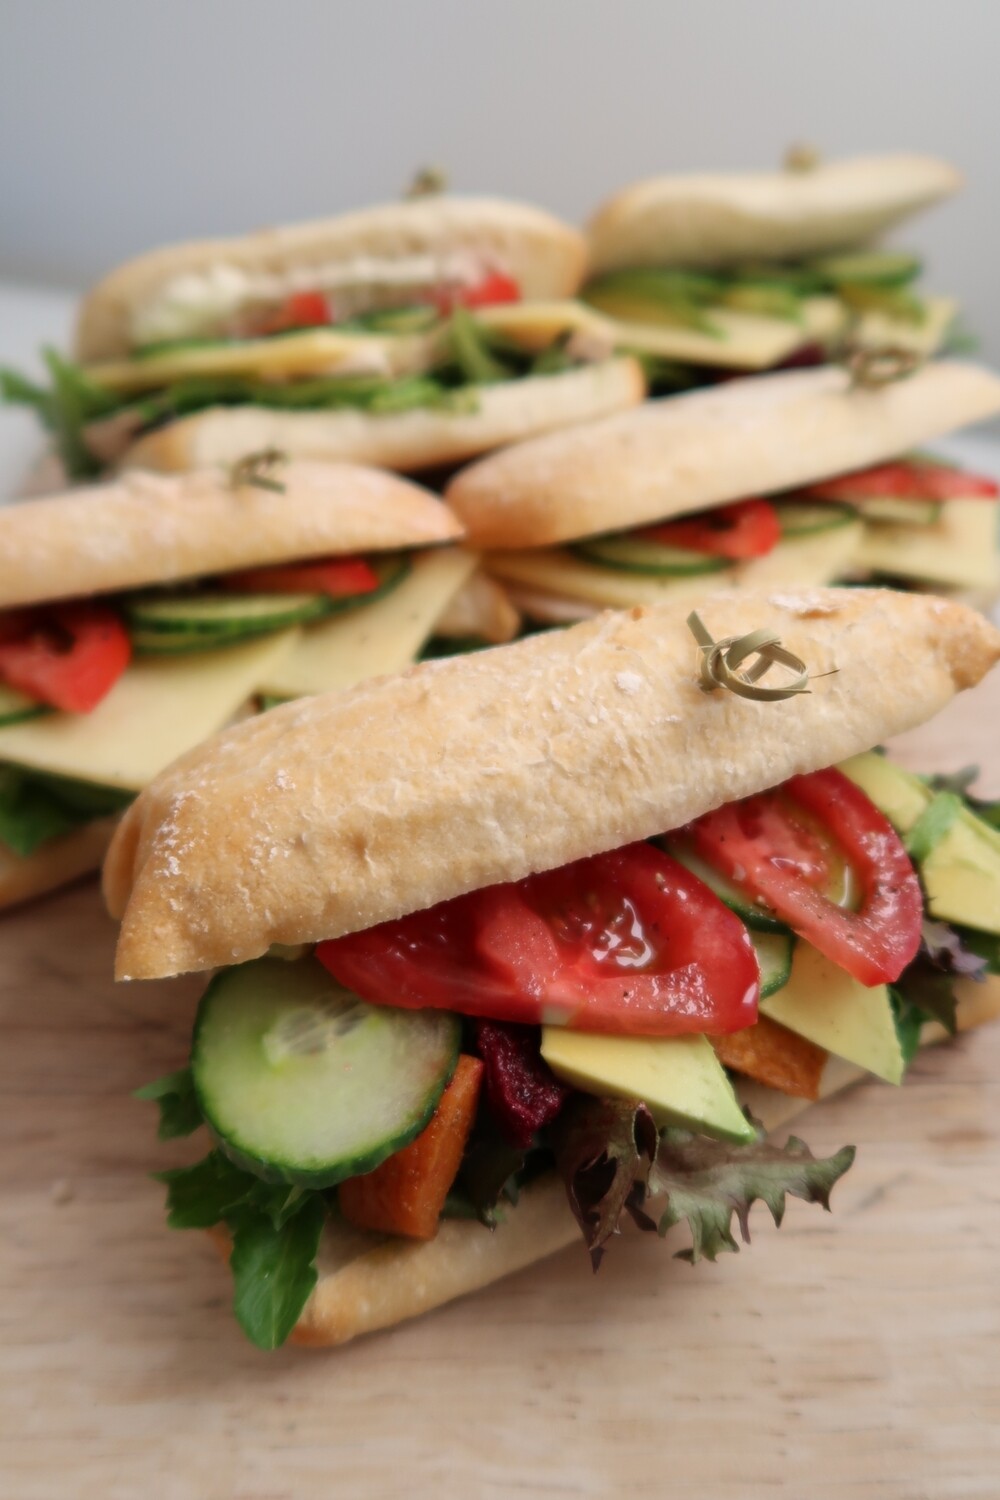 SANDWICH SUBSCRIPTION GREENSCHOOL  KIDS: freshly baked Ciabata pocket or Sourdough Rye Bread, filled with salad greens, cucumber, tomato and your choice spread and filling.